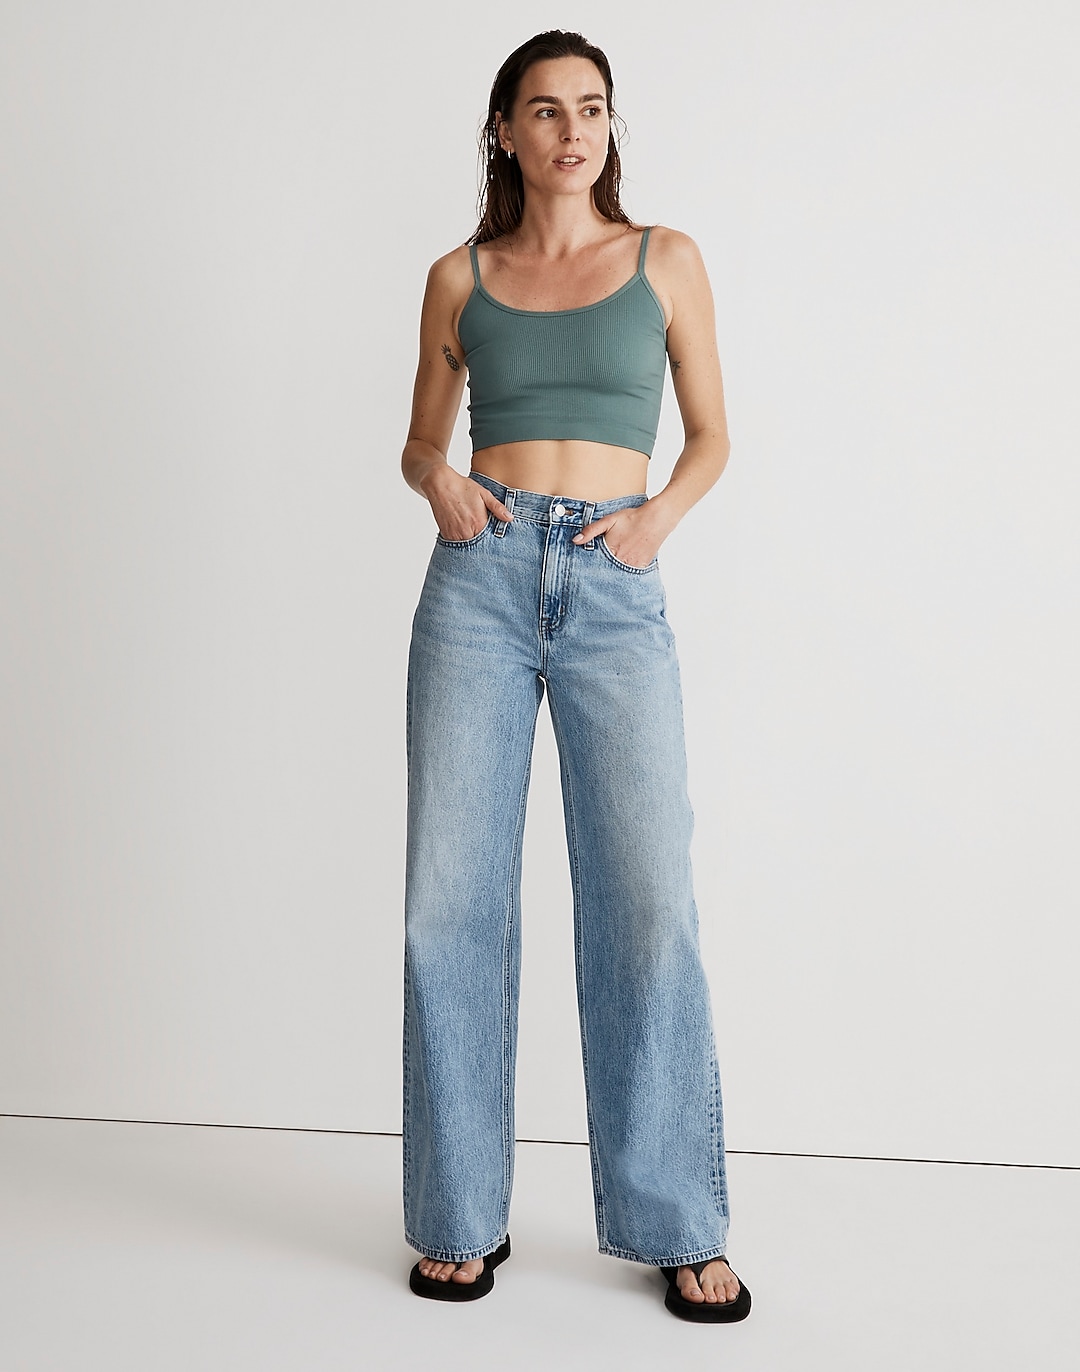 Superwide-Leg Jeans in Varian Wash | Madewell